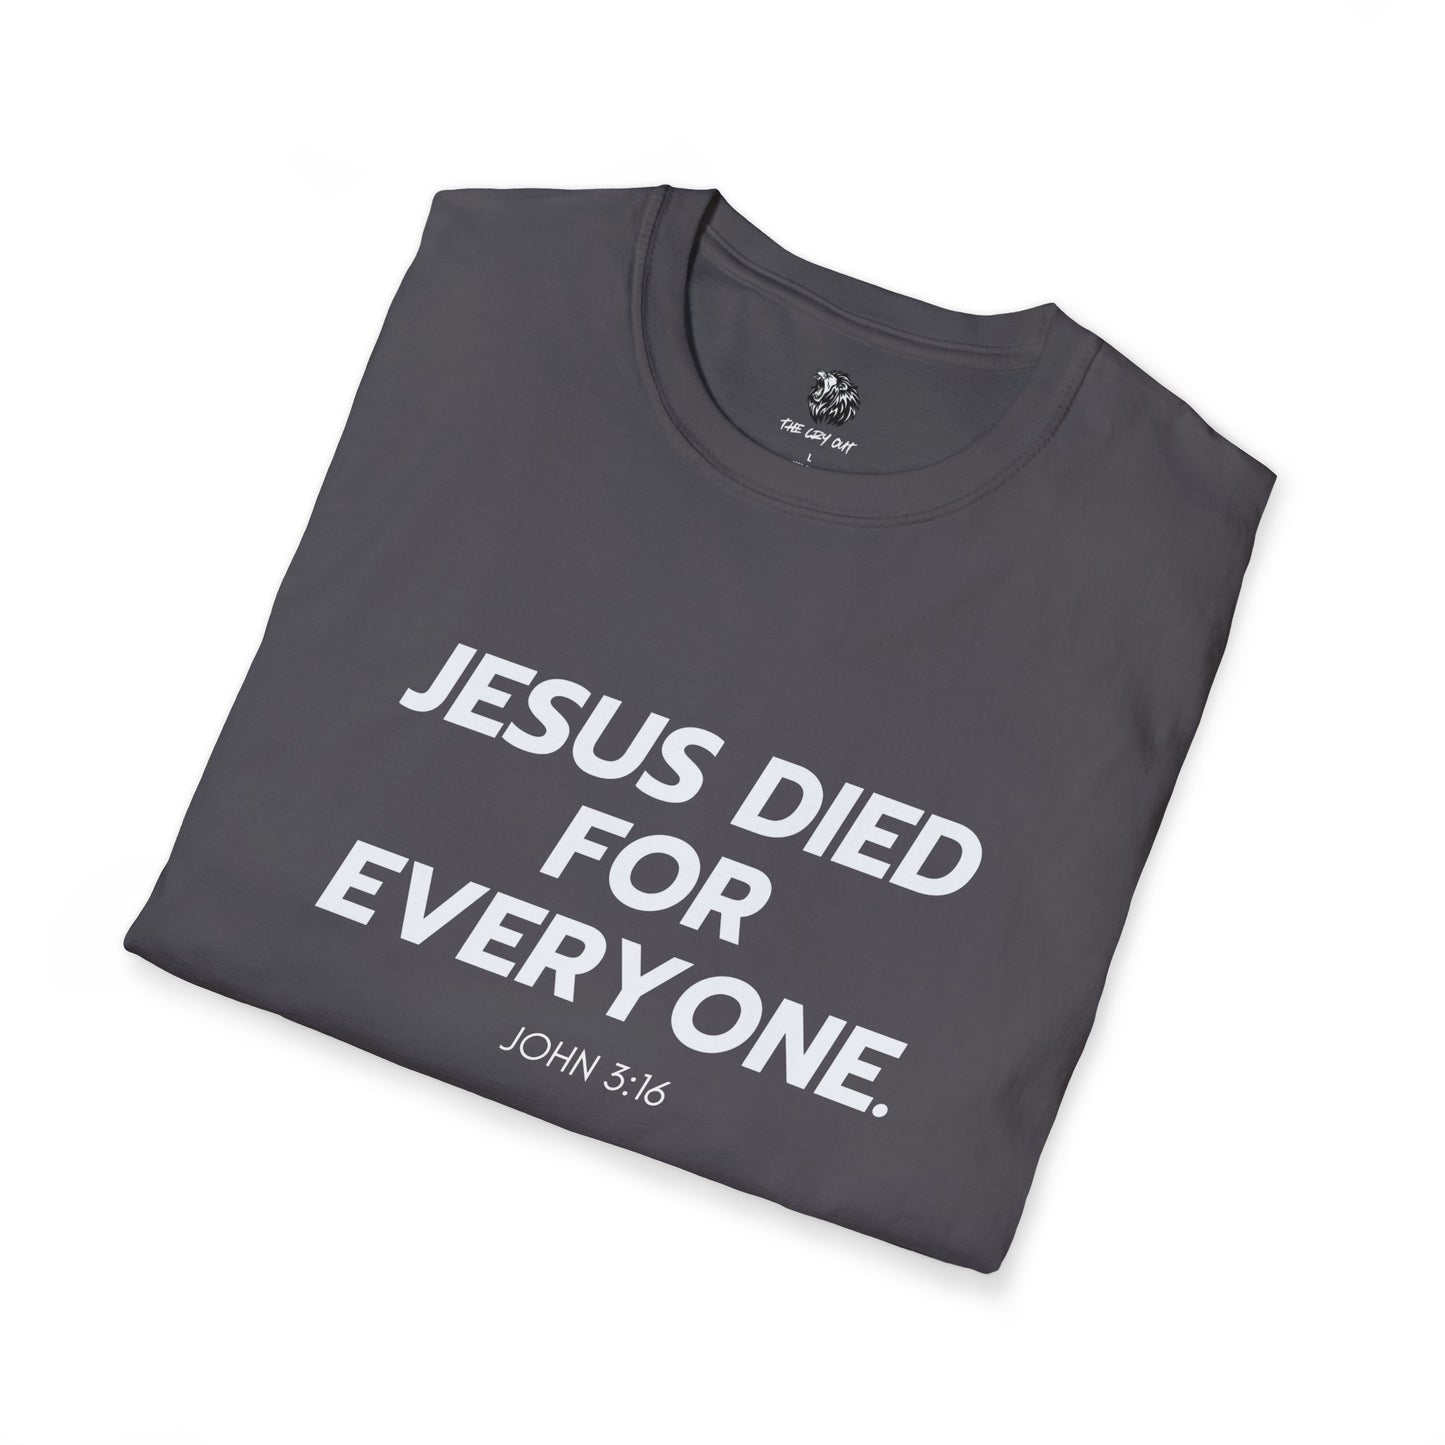 CLASSIC BLACK FOR EVERYONE TEE